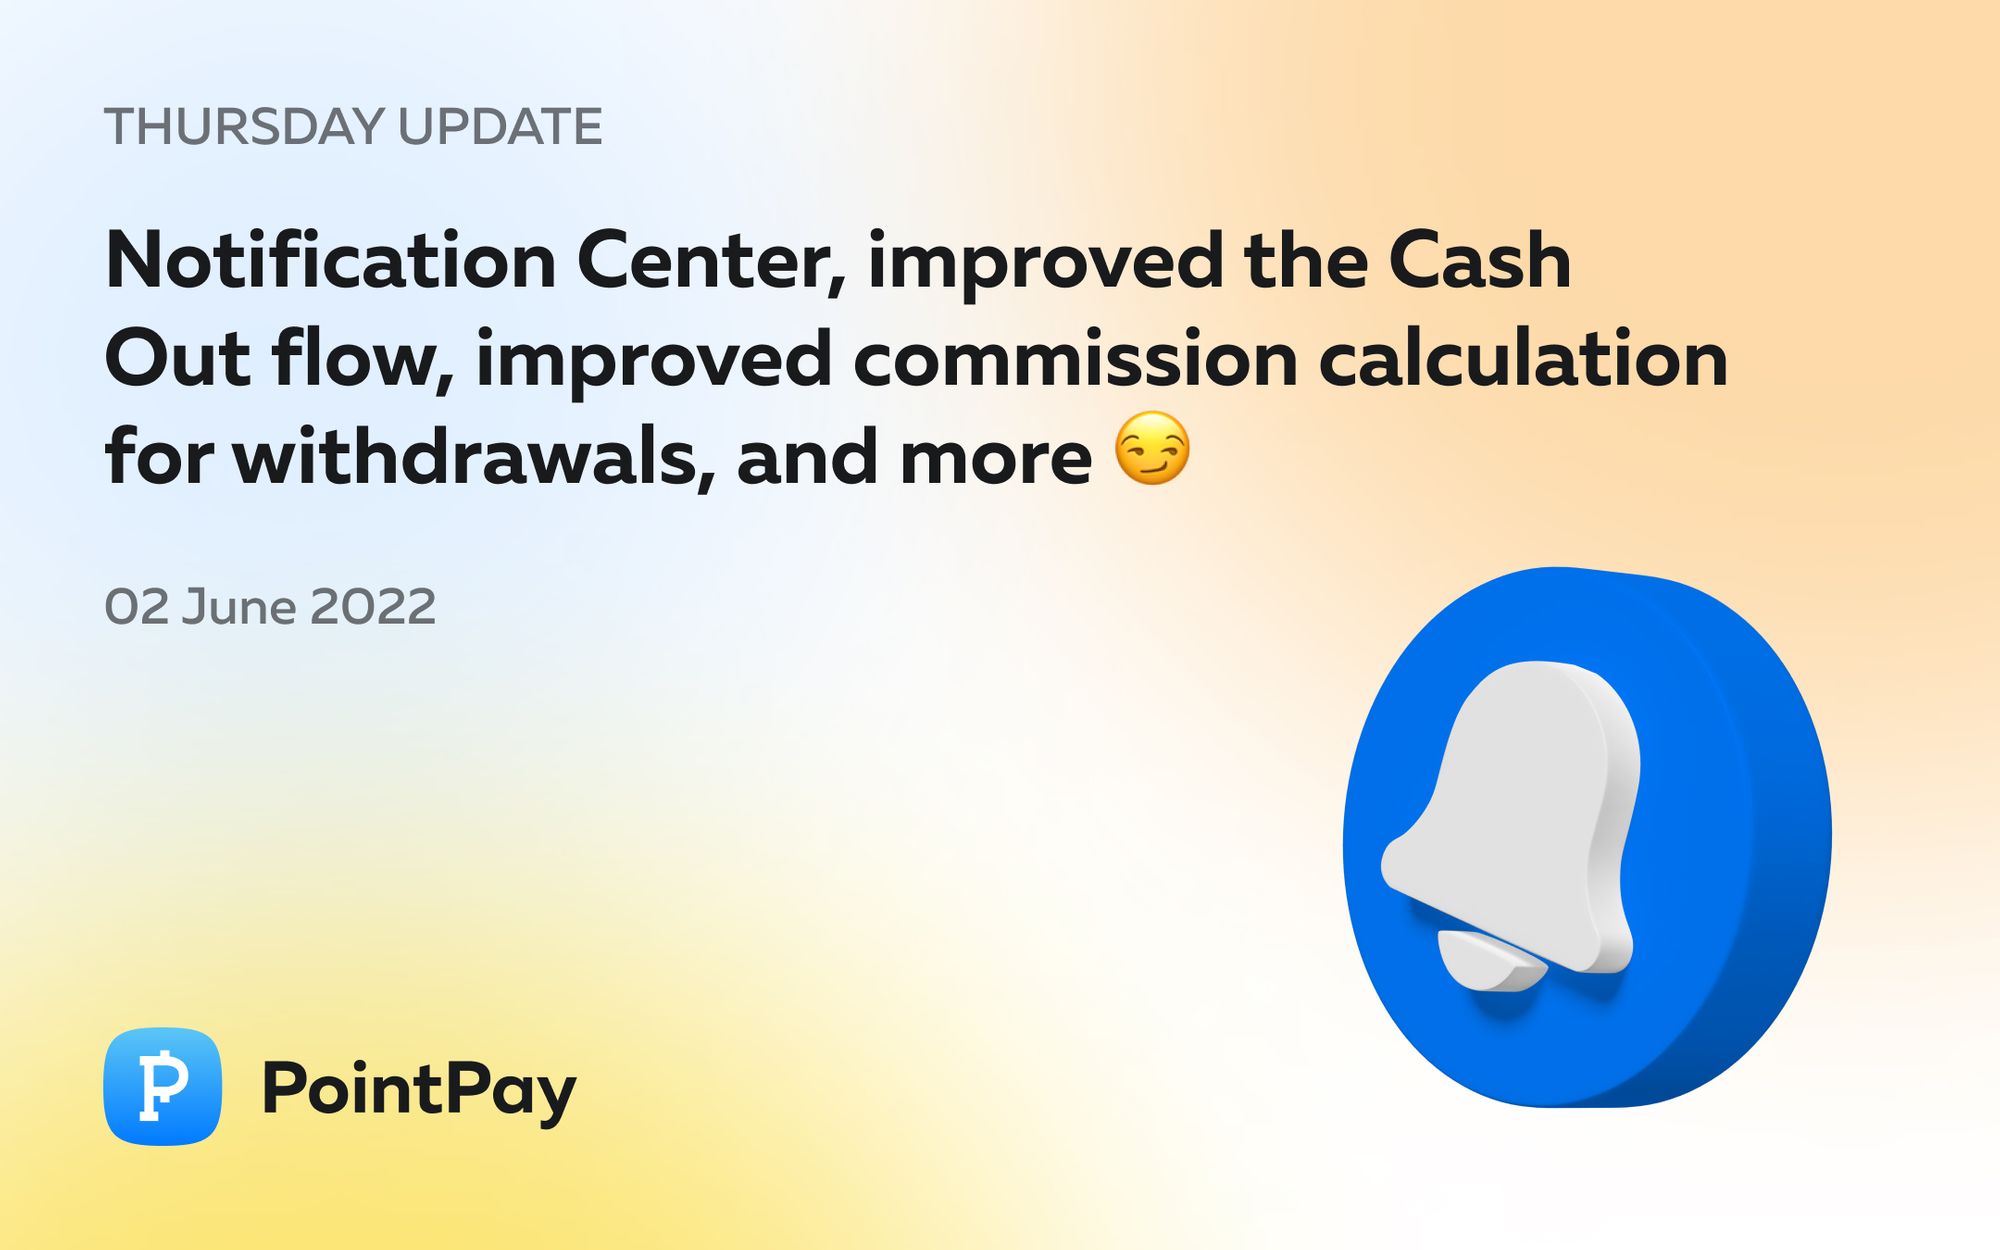 Thursday update from PointPay